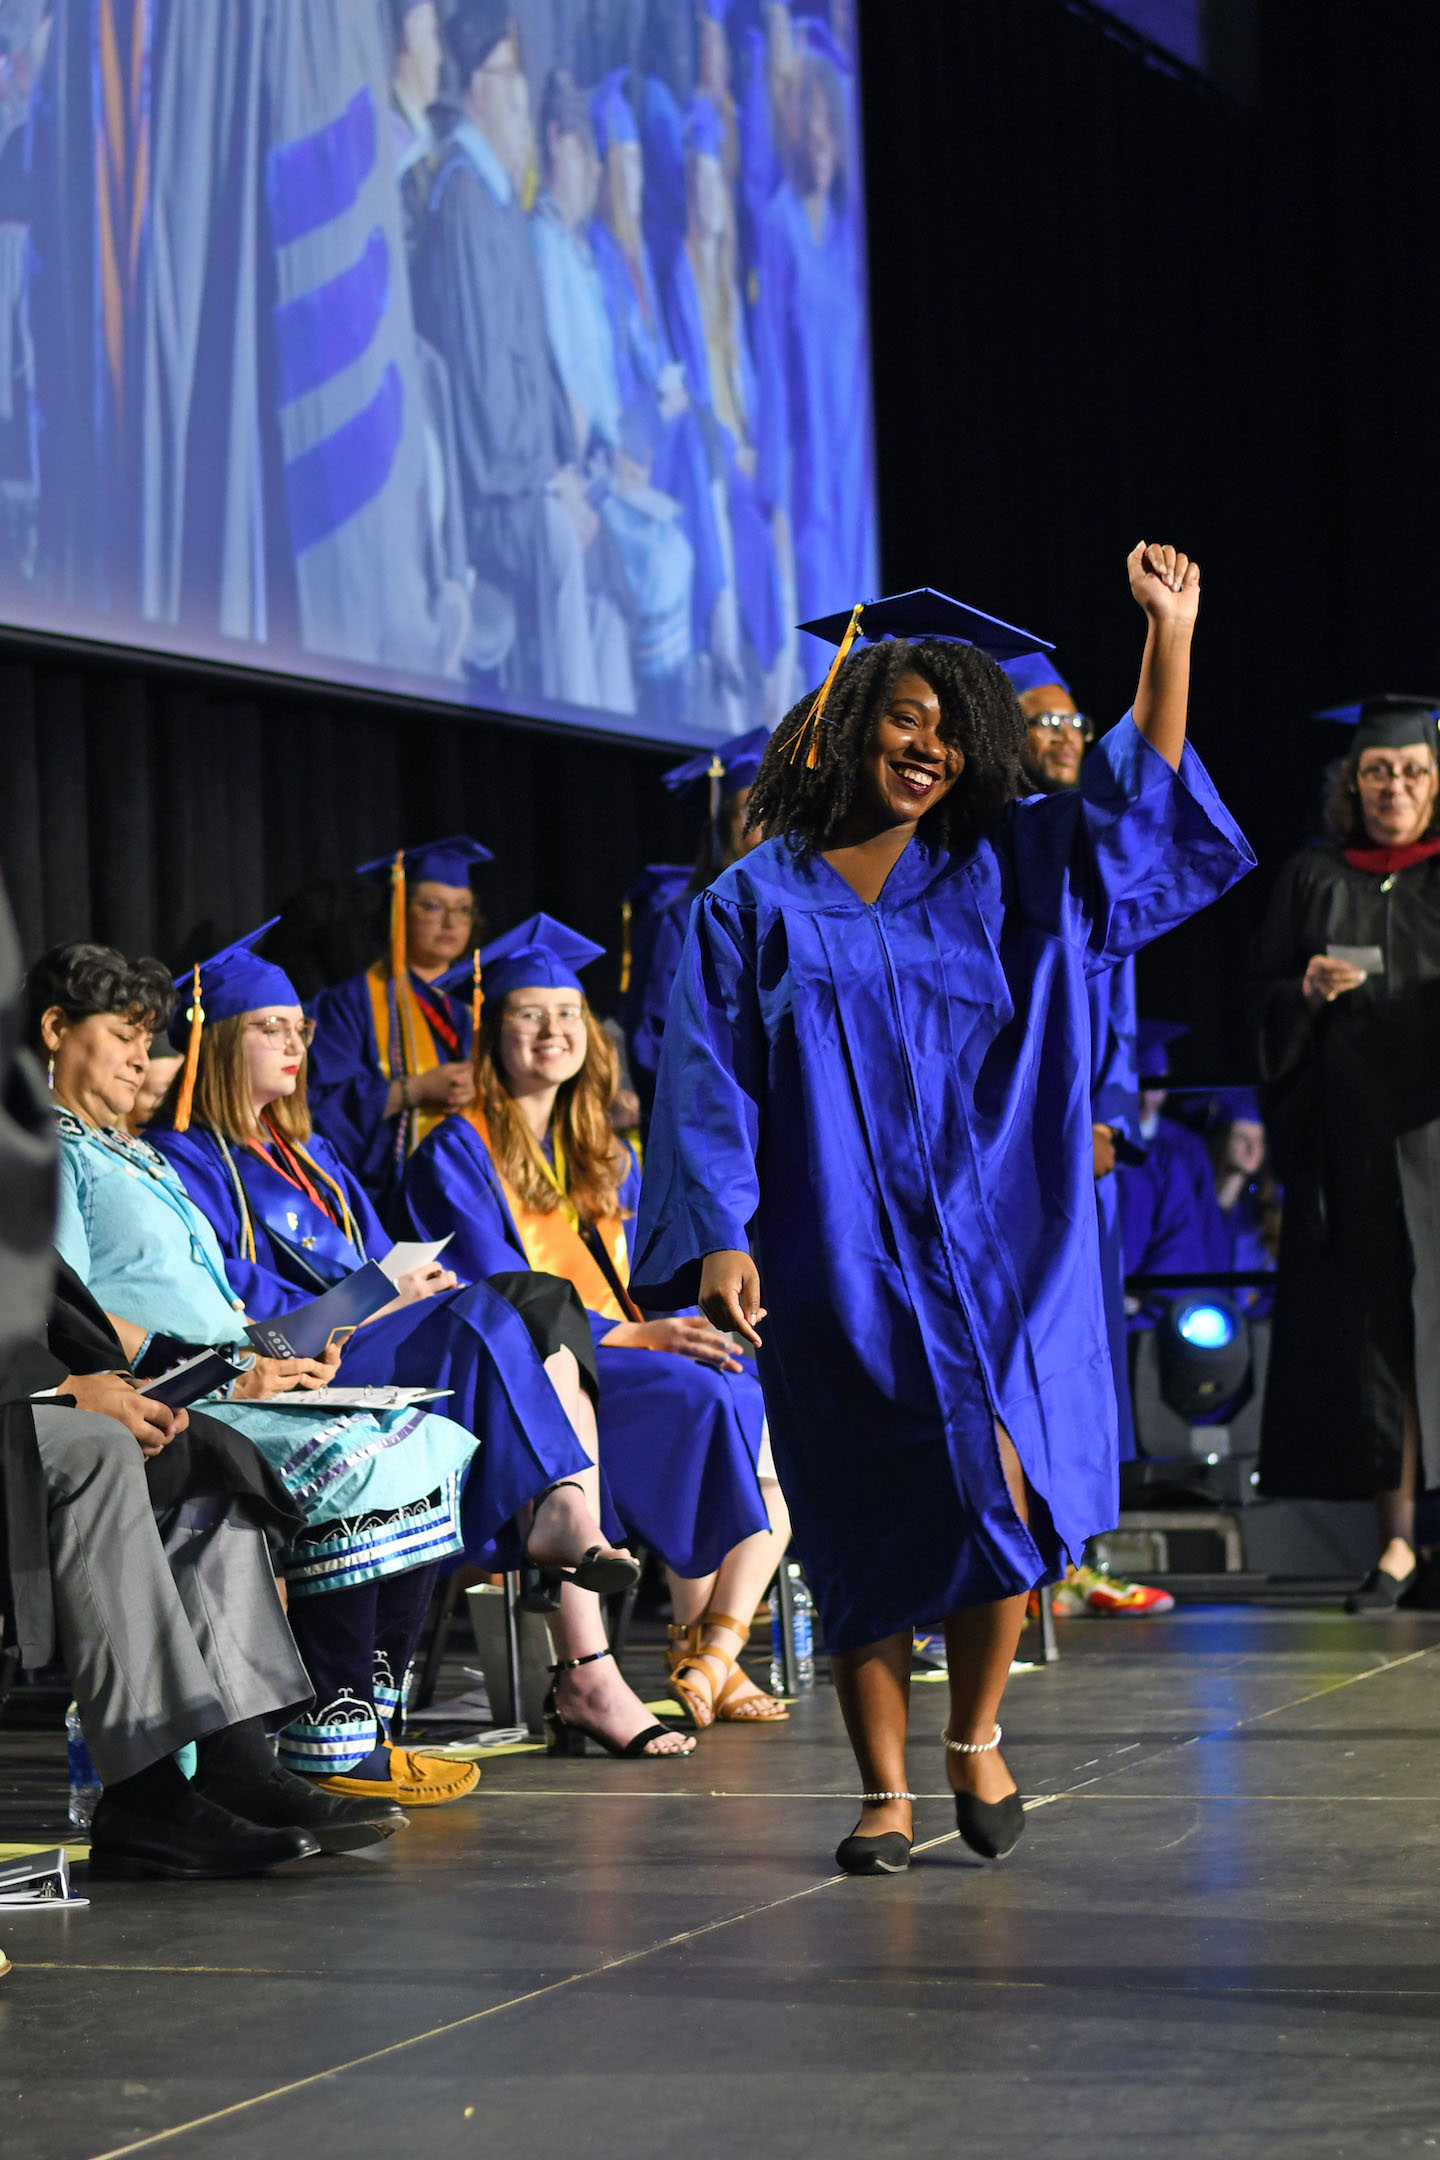 More than 300 graduates participated in NCCC's 59th commencement